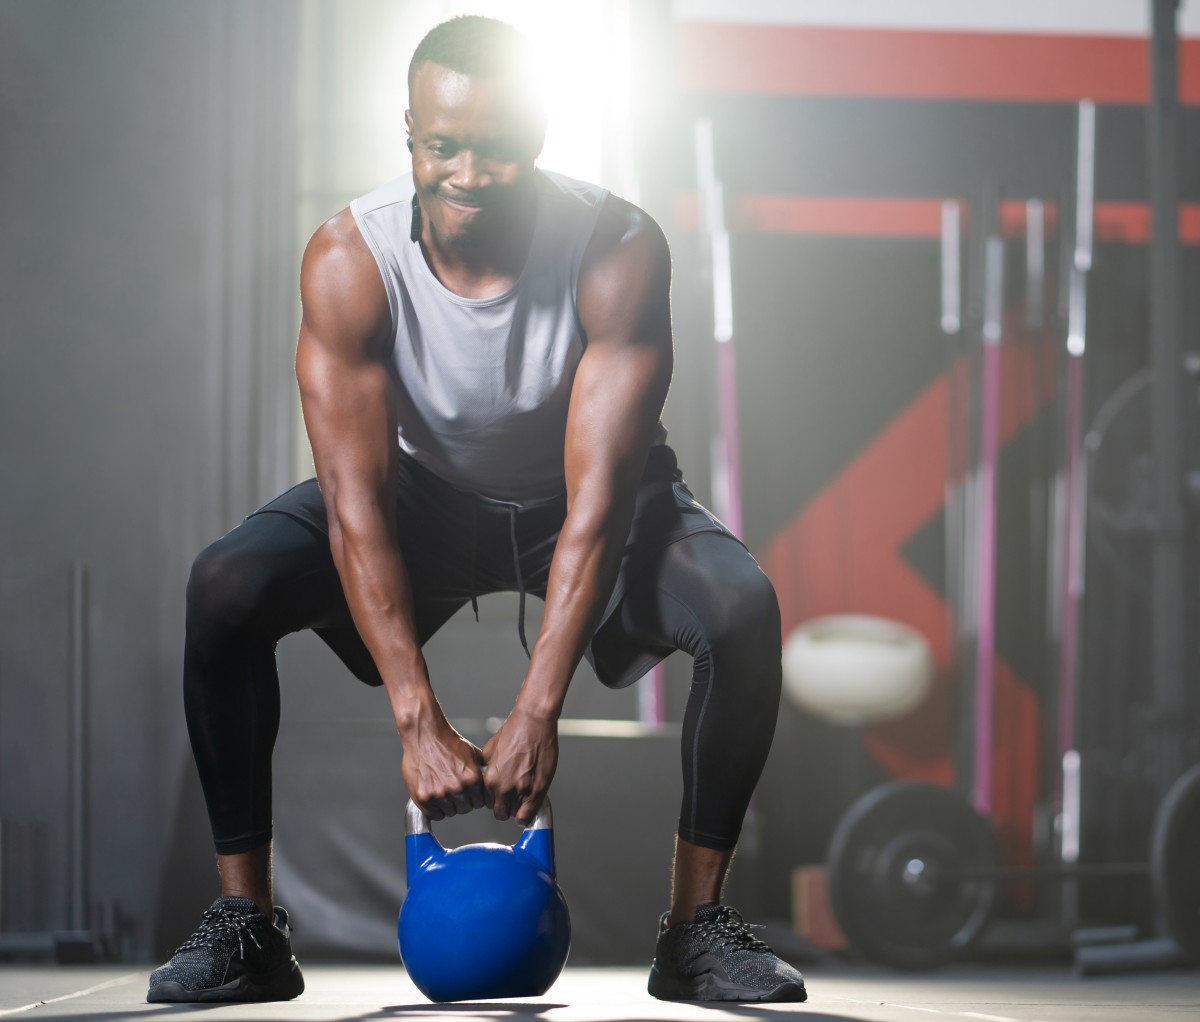 forening pant lastbil 14 At-Home Workouts You Can Do With 1 Kettlebell | Men's Journal - Men's  Journal